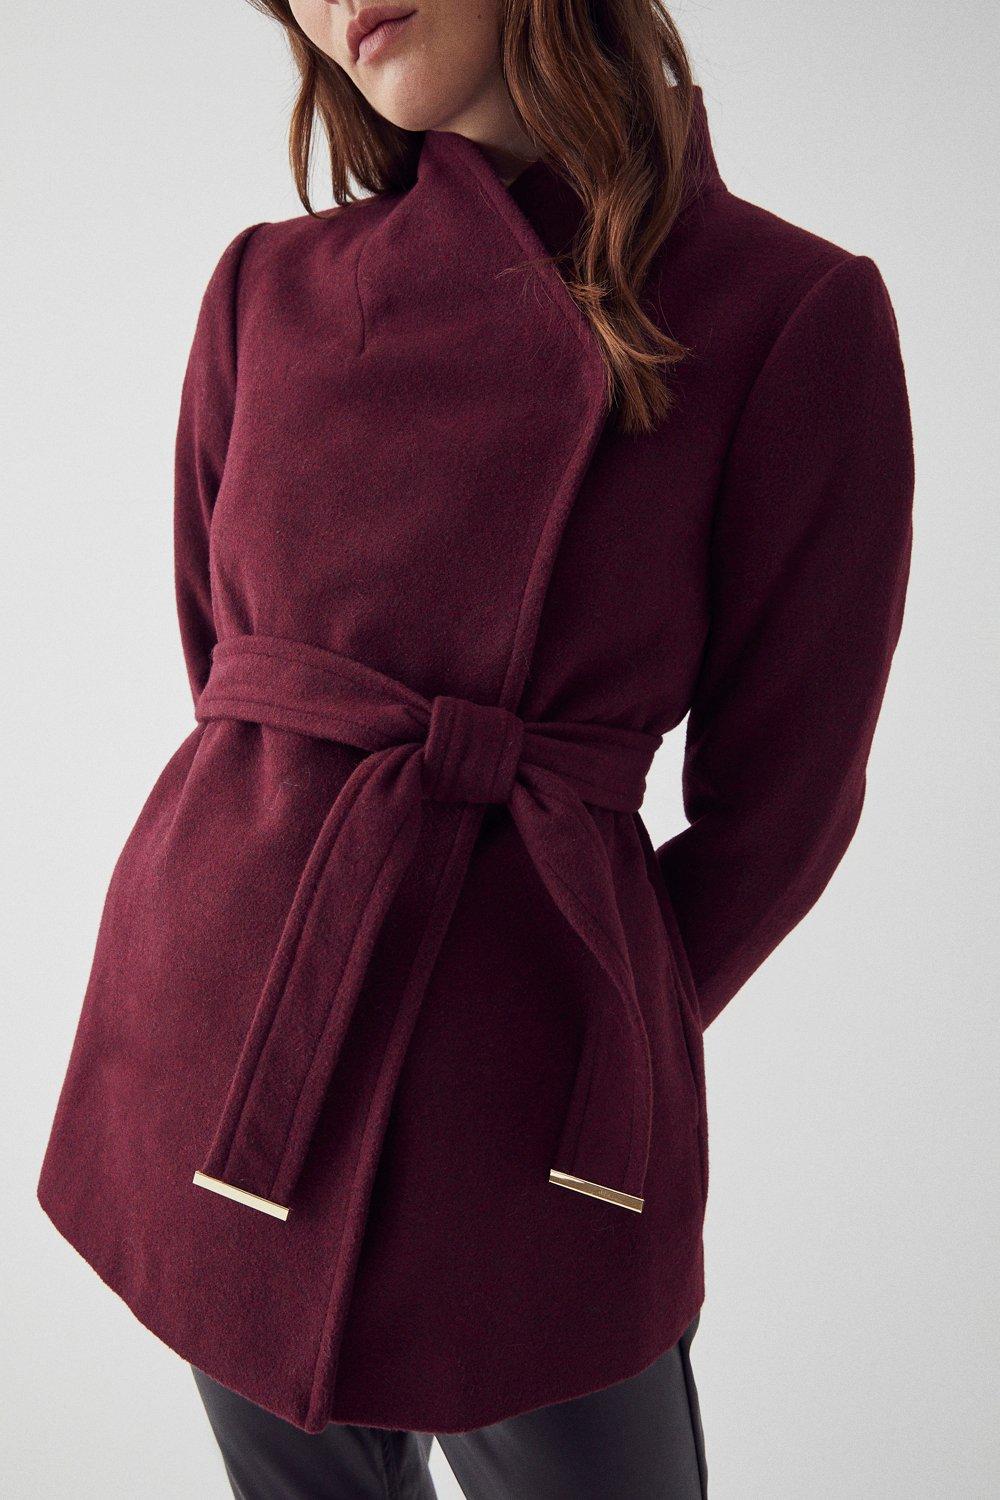 Wool Mix Short Belted Funnel Neck Wrap Coat | Warehouse